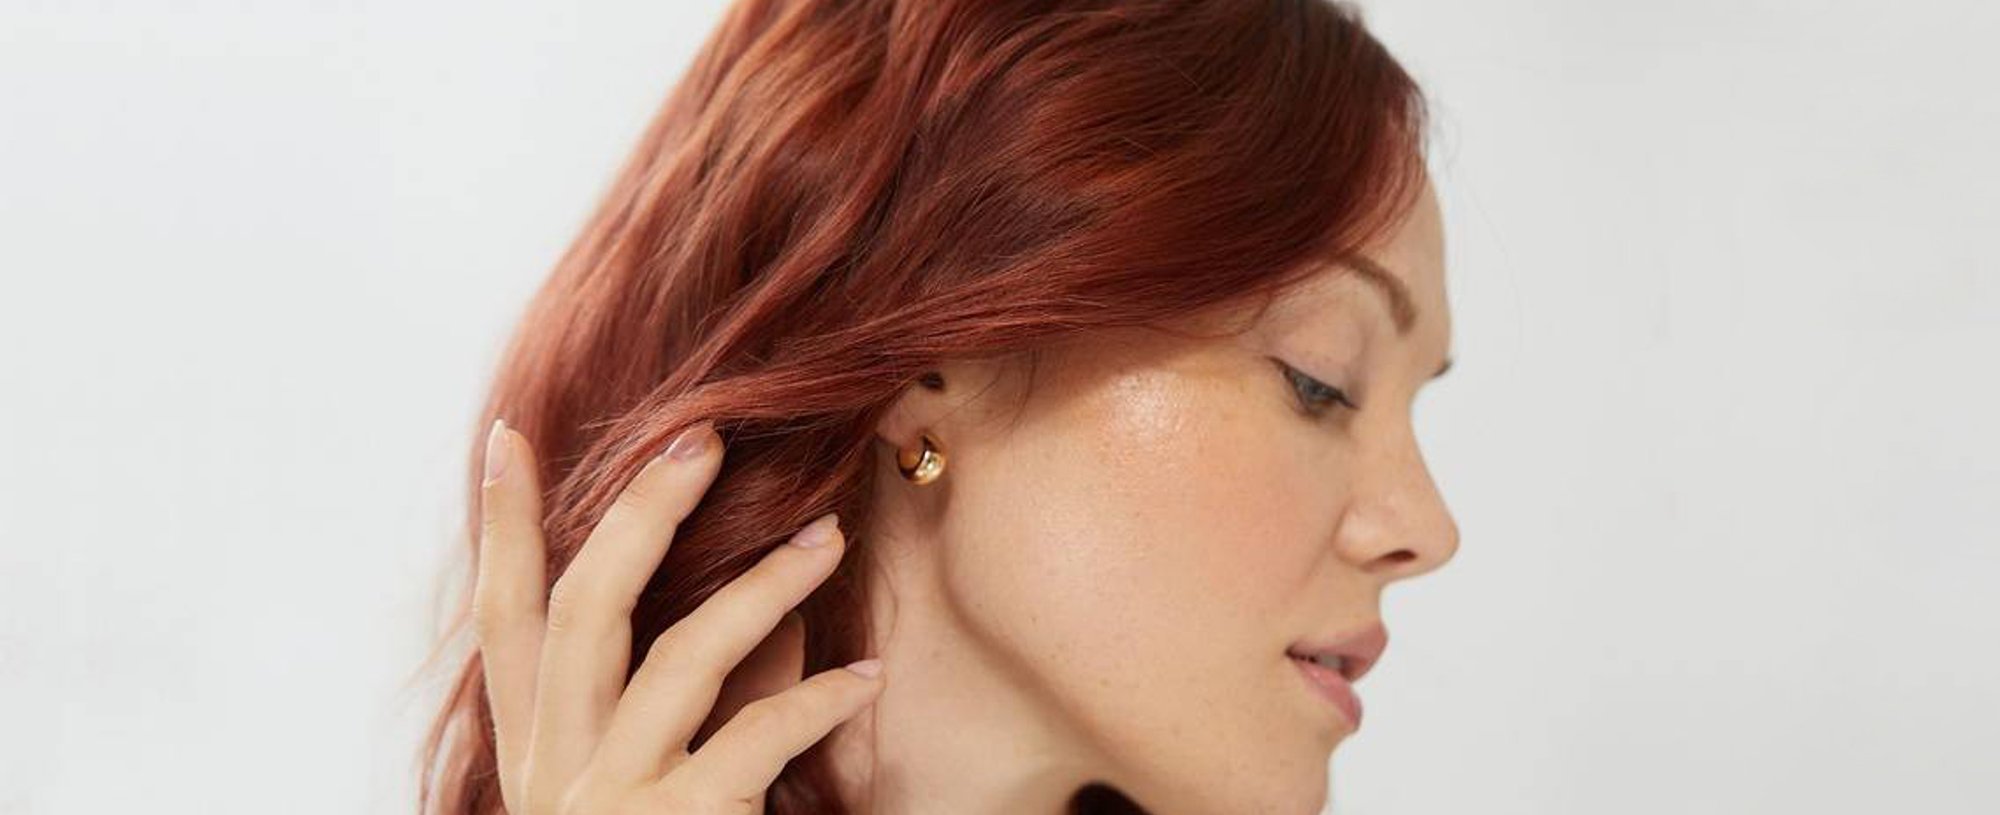 Tips to Caring For Your (Unnaturally) Red Hair